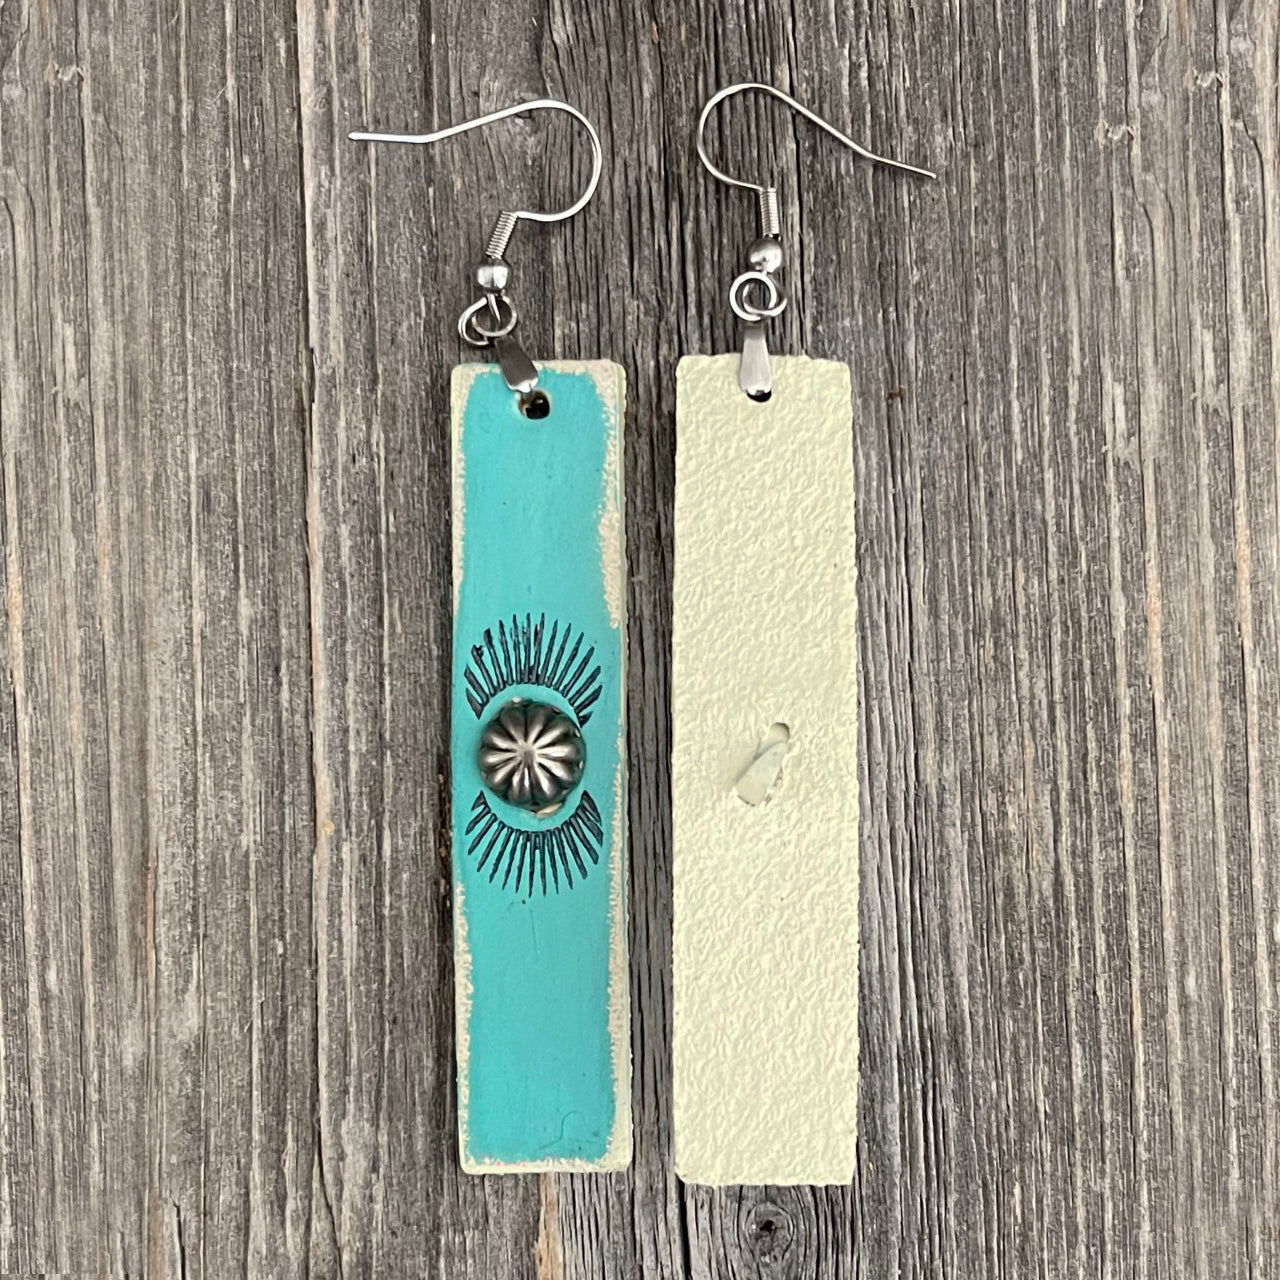 MADE TO ORDER - One of a Kind, genuine leather turquoise stripes handmade earrings with rivets